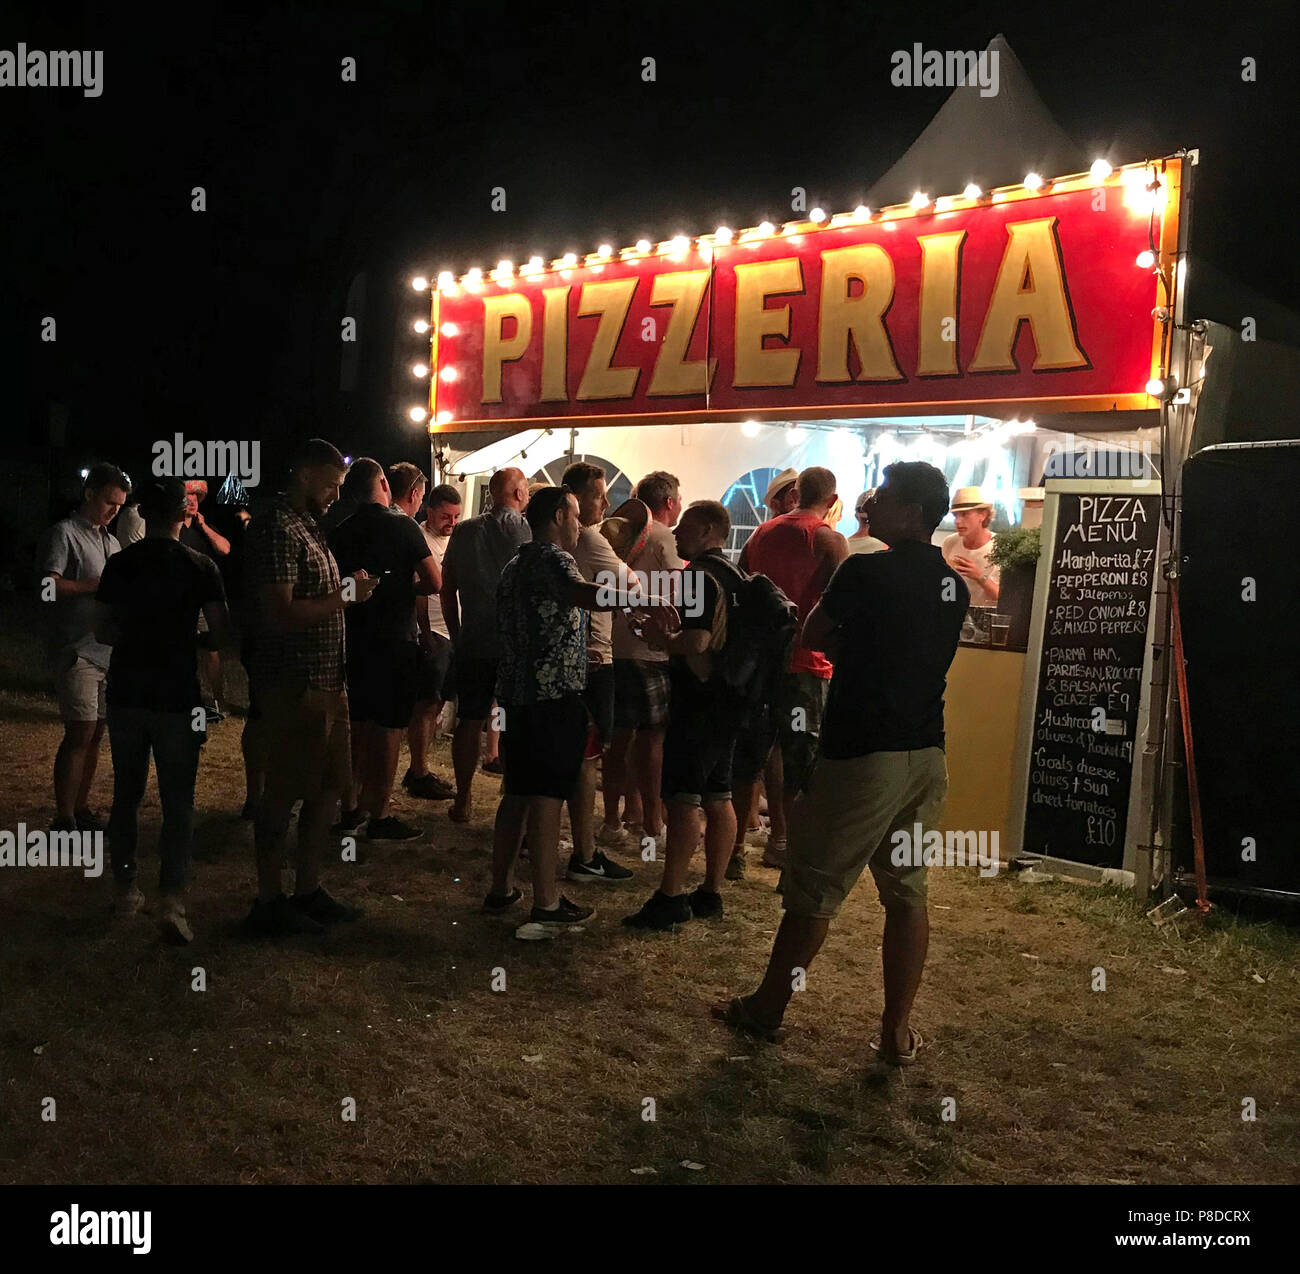 Pizzeria at festival at night with group of people, Silverstone Woodlands, Formula One, British Grand Prix, Northampton, England, UK Stock Photo